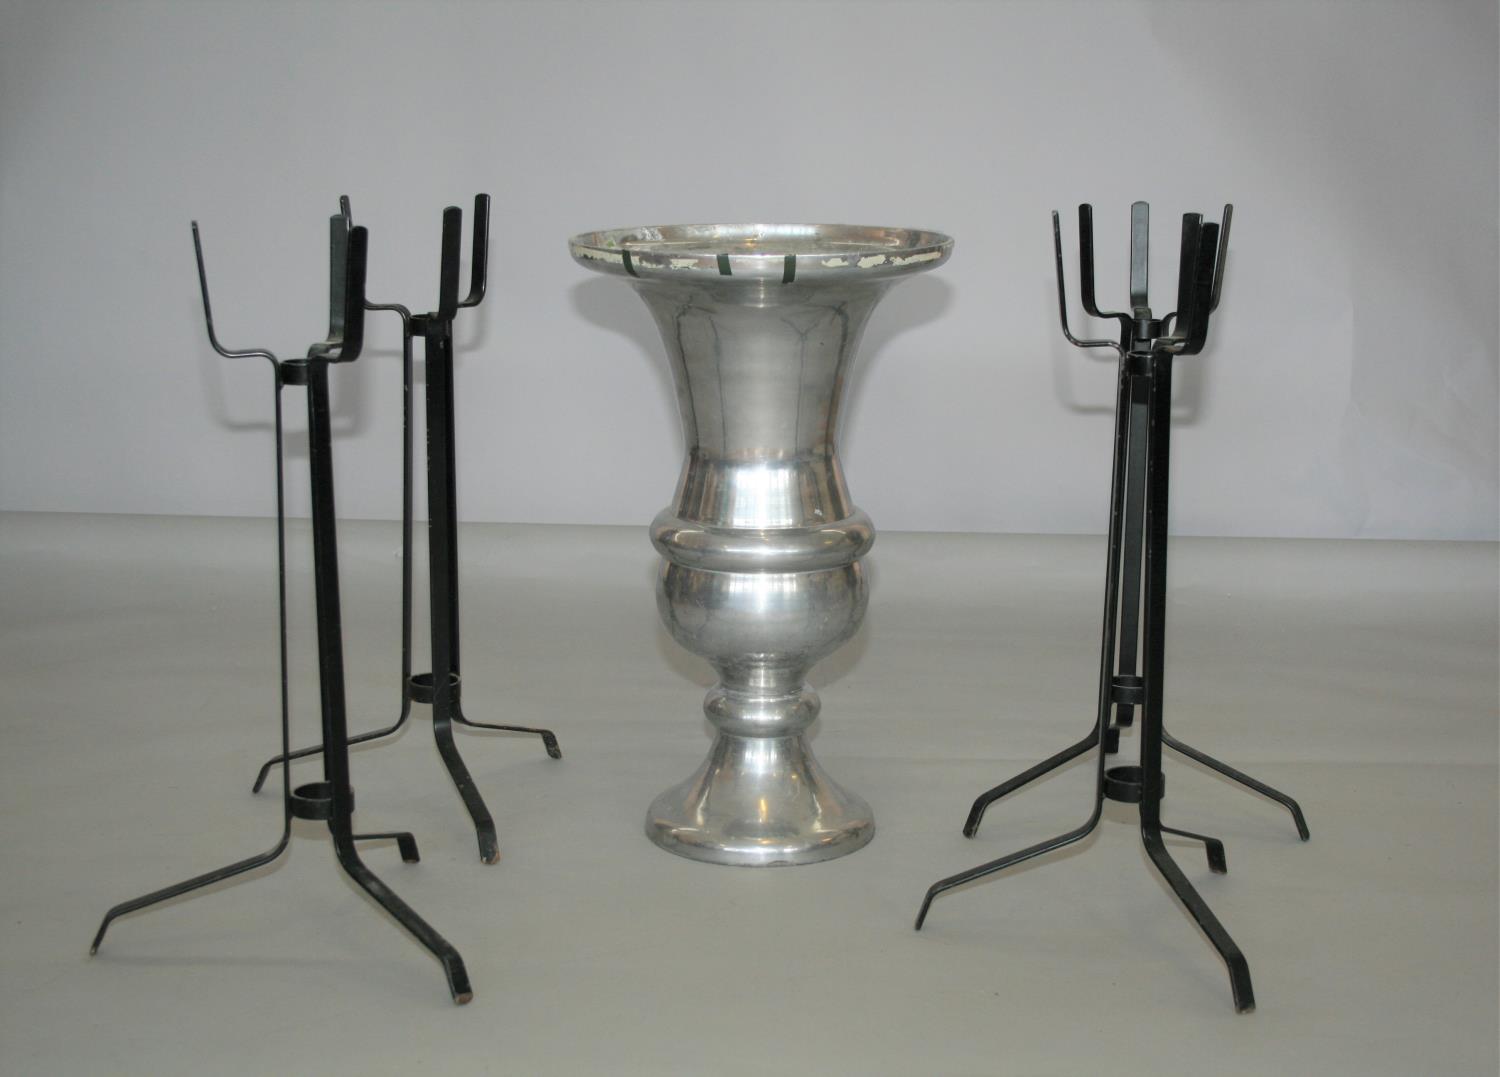 Chrome urn shaped vase (40W x 65H) and four black candle stand.